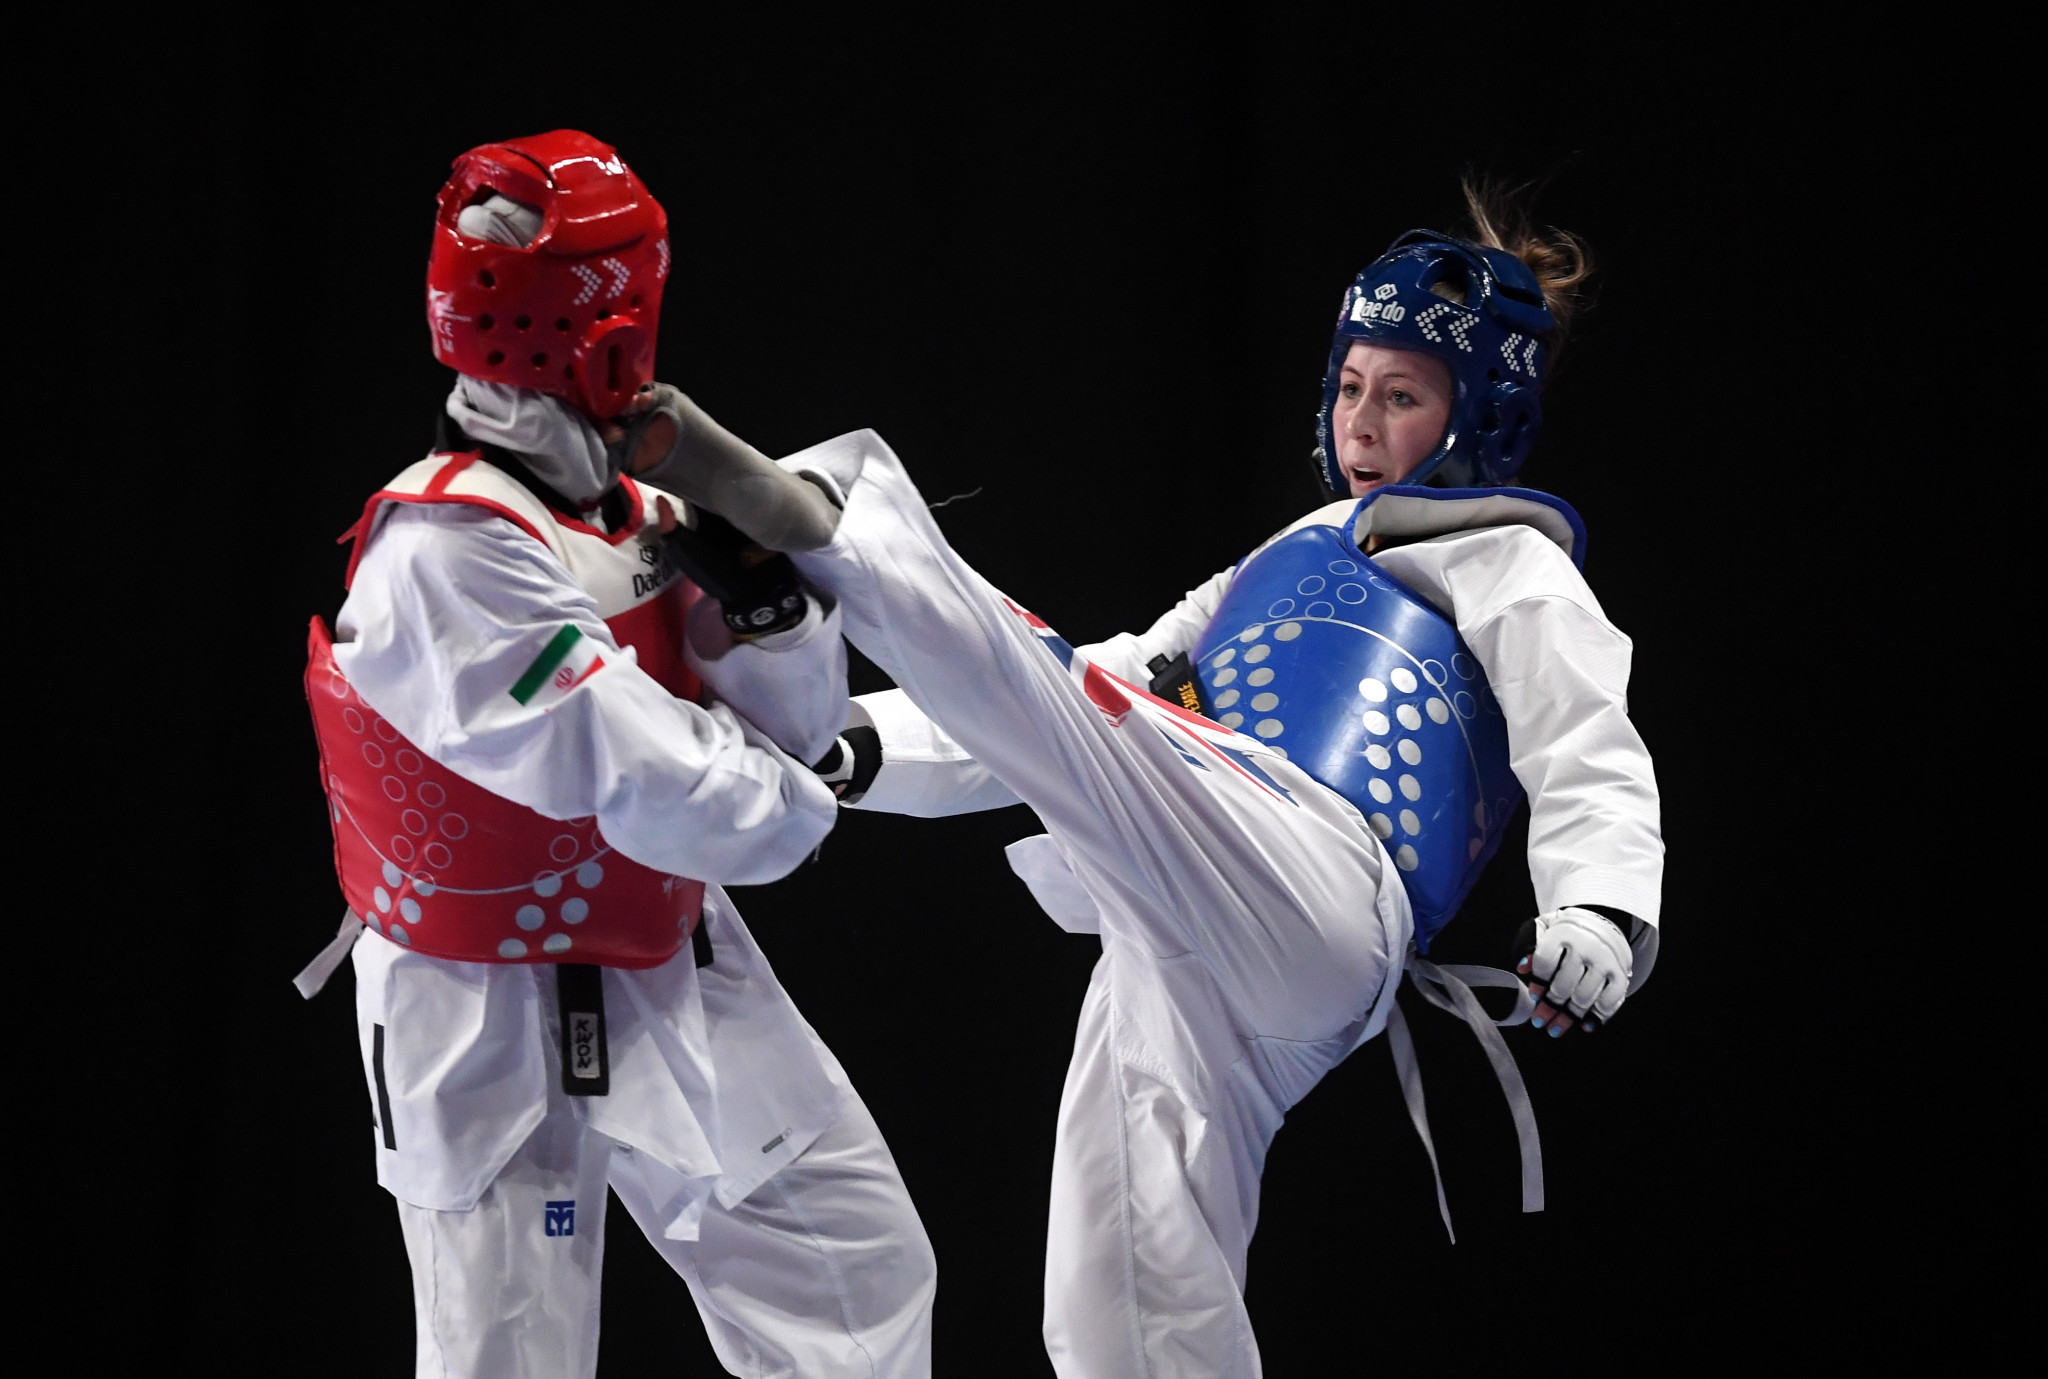 Two-time Olympic champion Jade Jones of Britain progressed to tomorrow's women's under-57kg final ©Getty Images